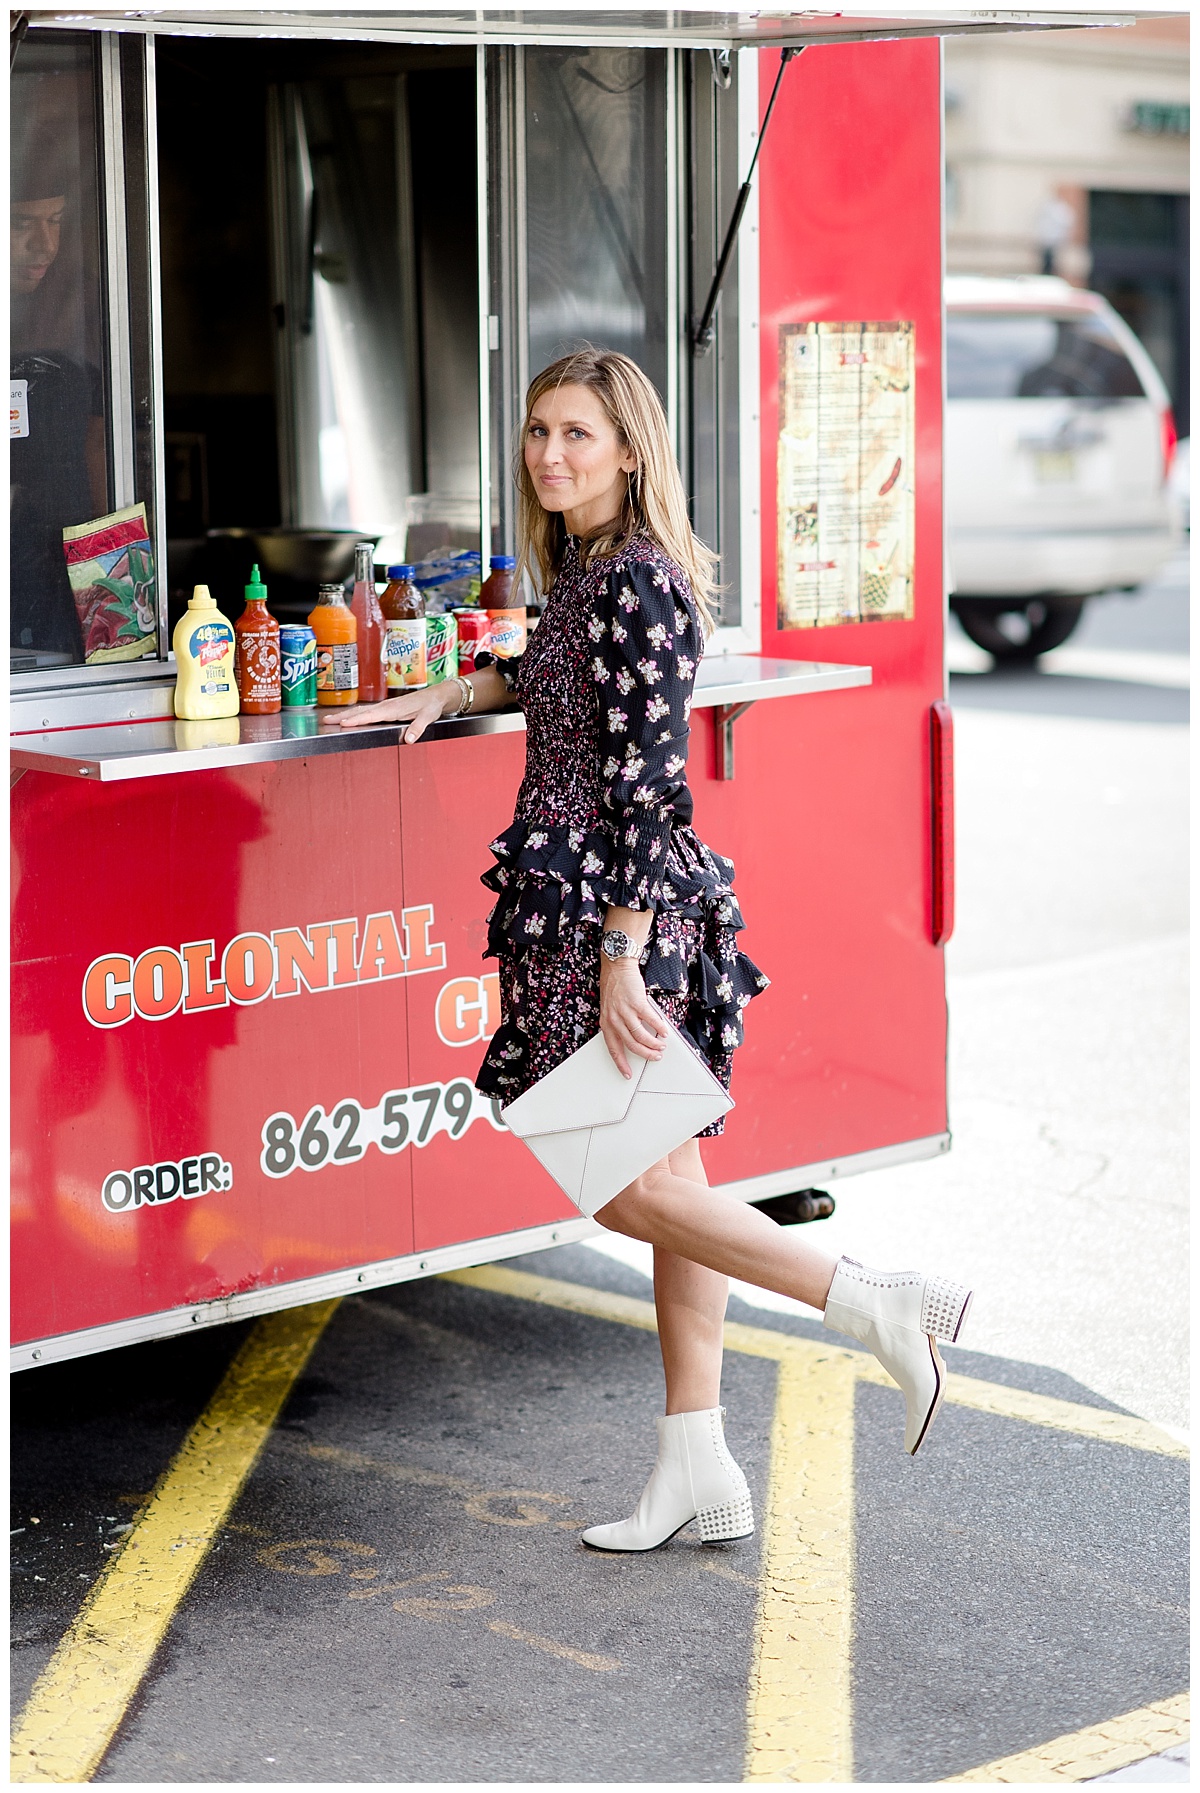 Food Truck and White Boots_0399.jpg